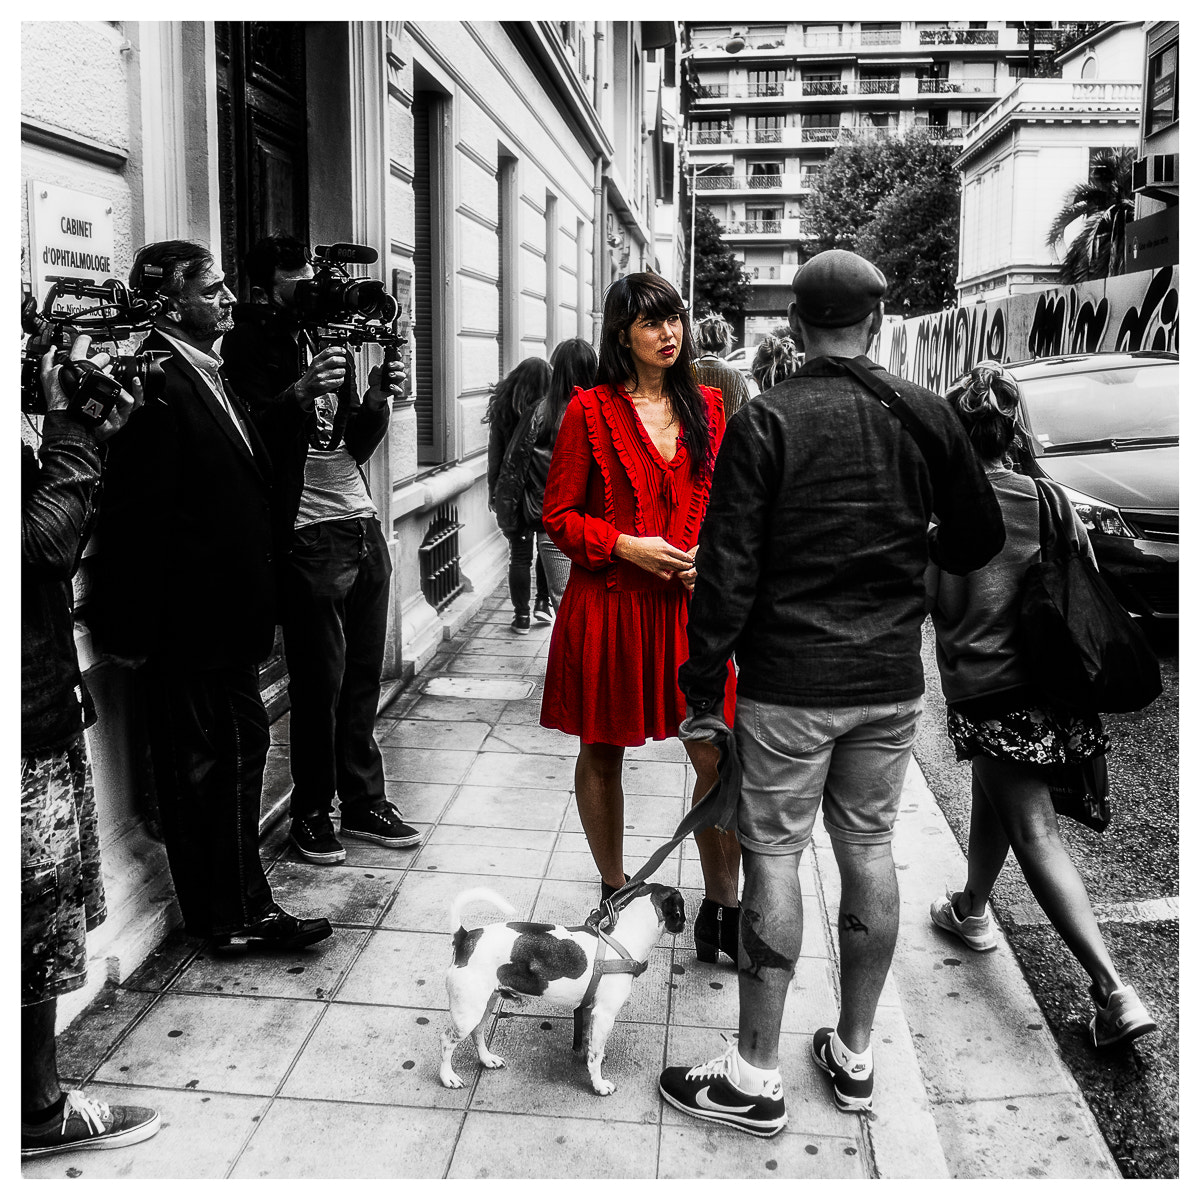 Fujifilm X-Pro1 sample photo. The woman in red. photography